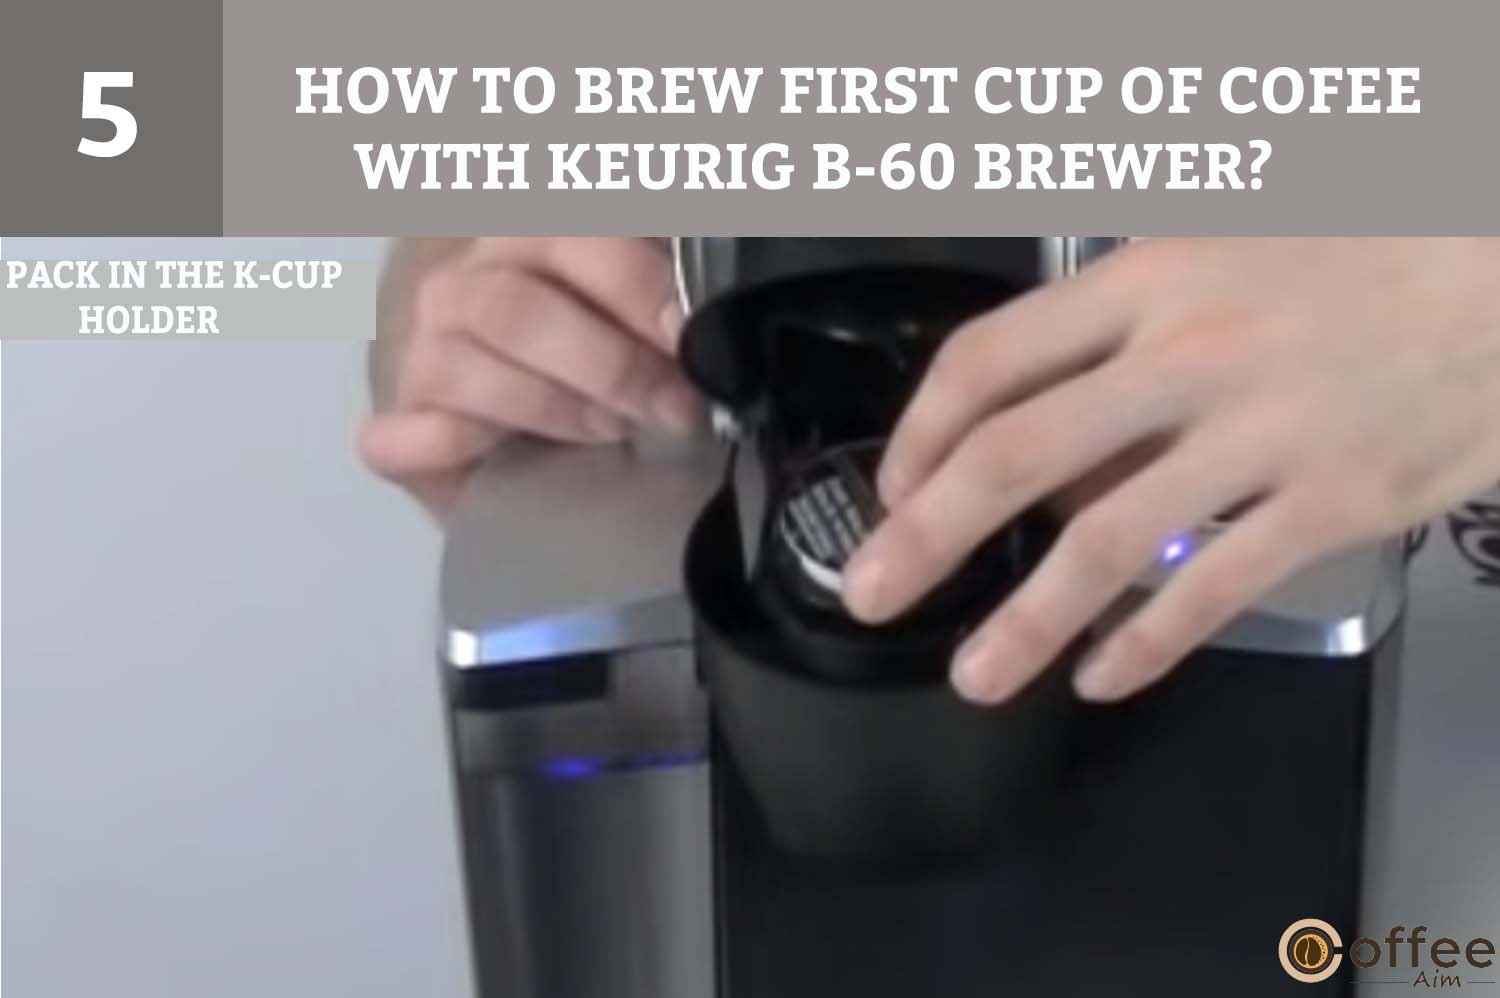 Gently lift the handle to open the K-Cup holder. Place the K-Cup portion pack securely inside the holder with the foil lid intact.